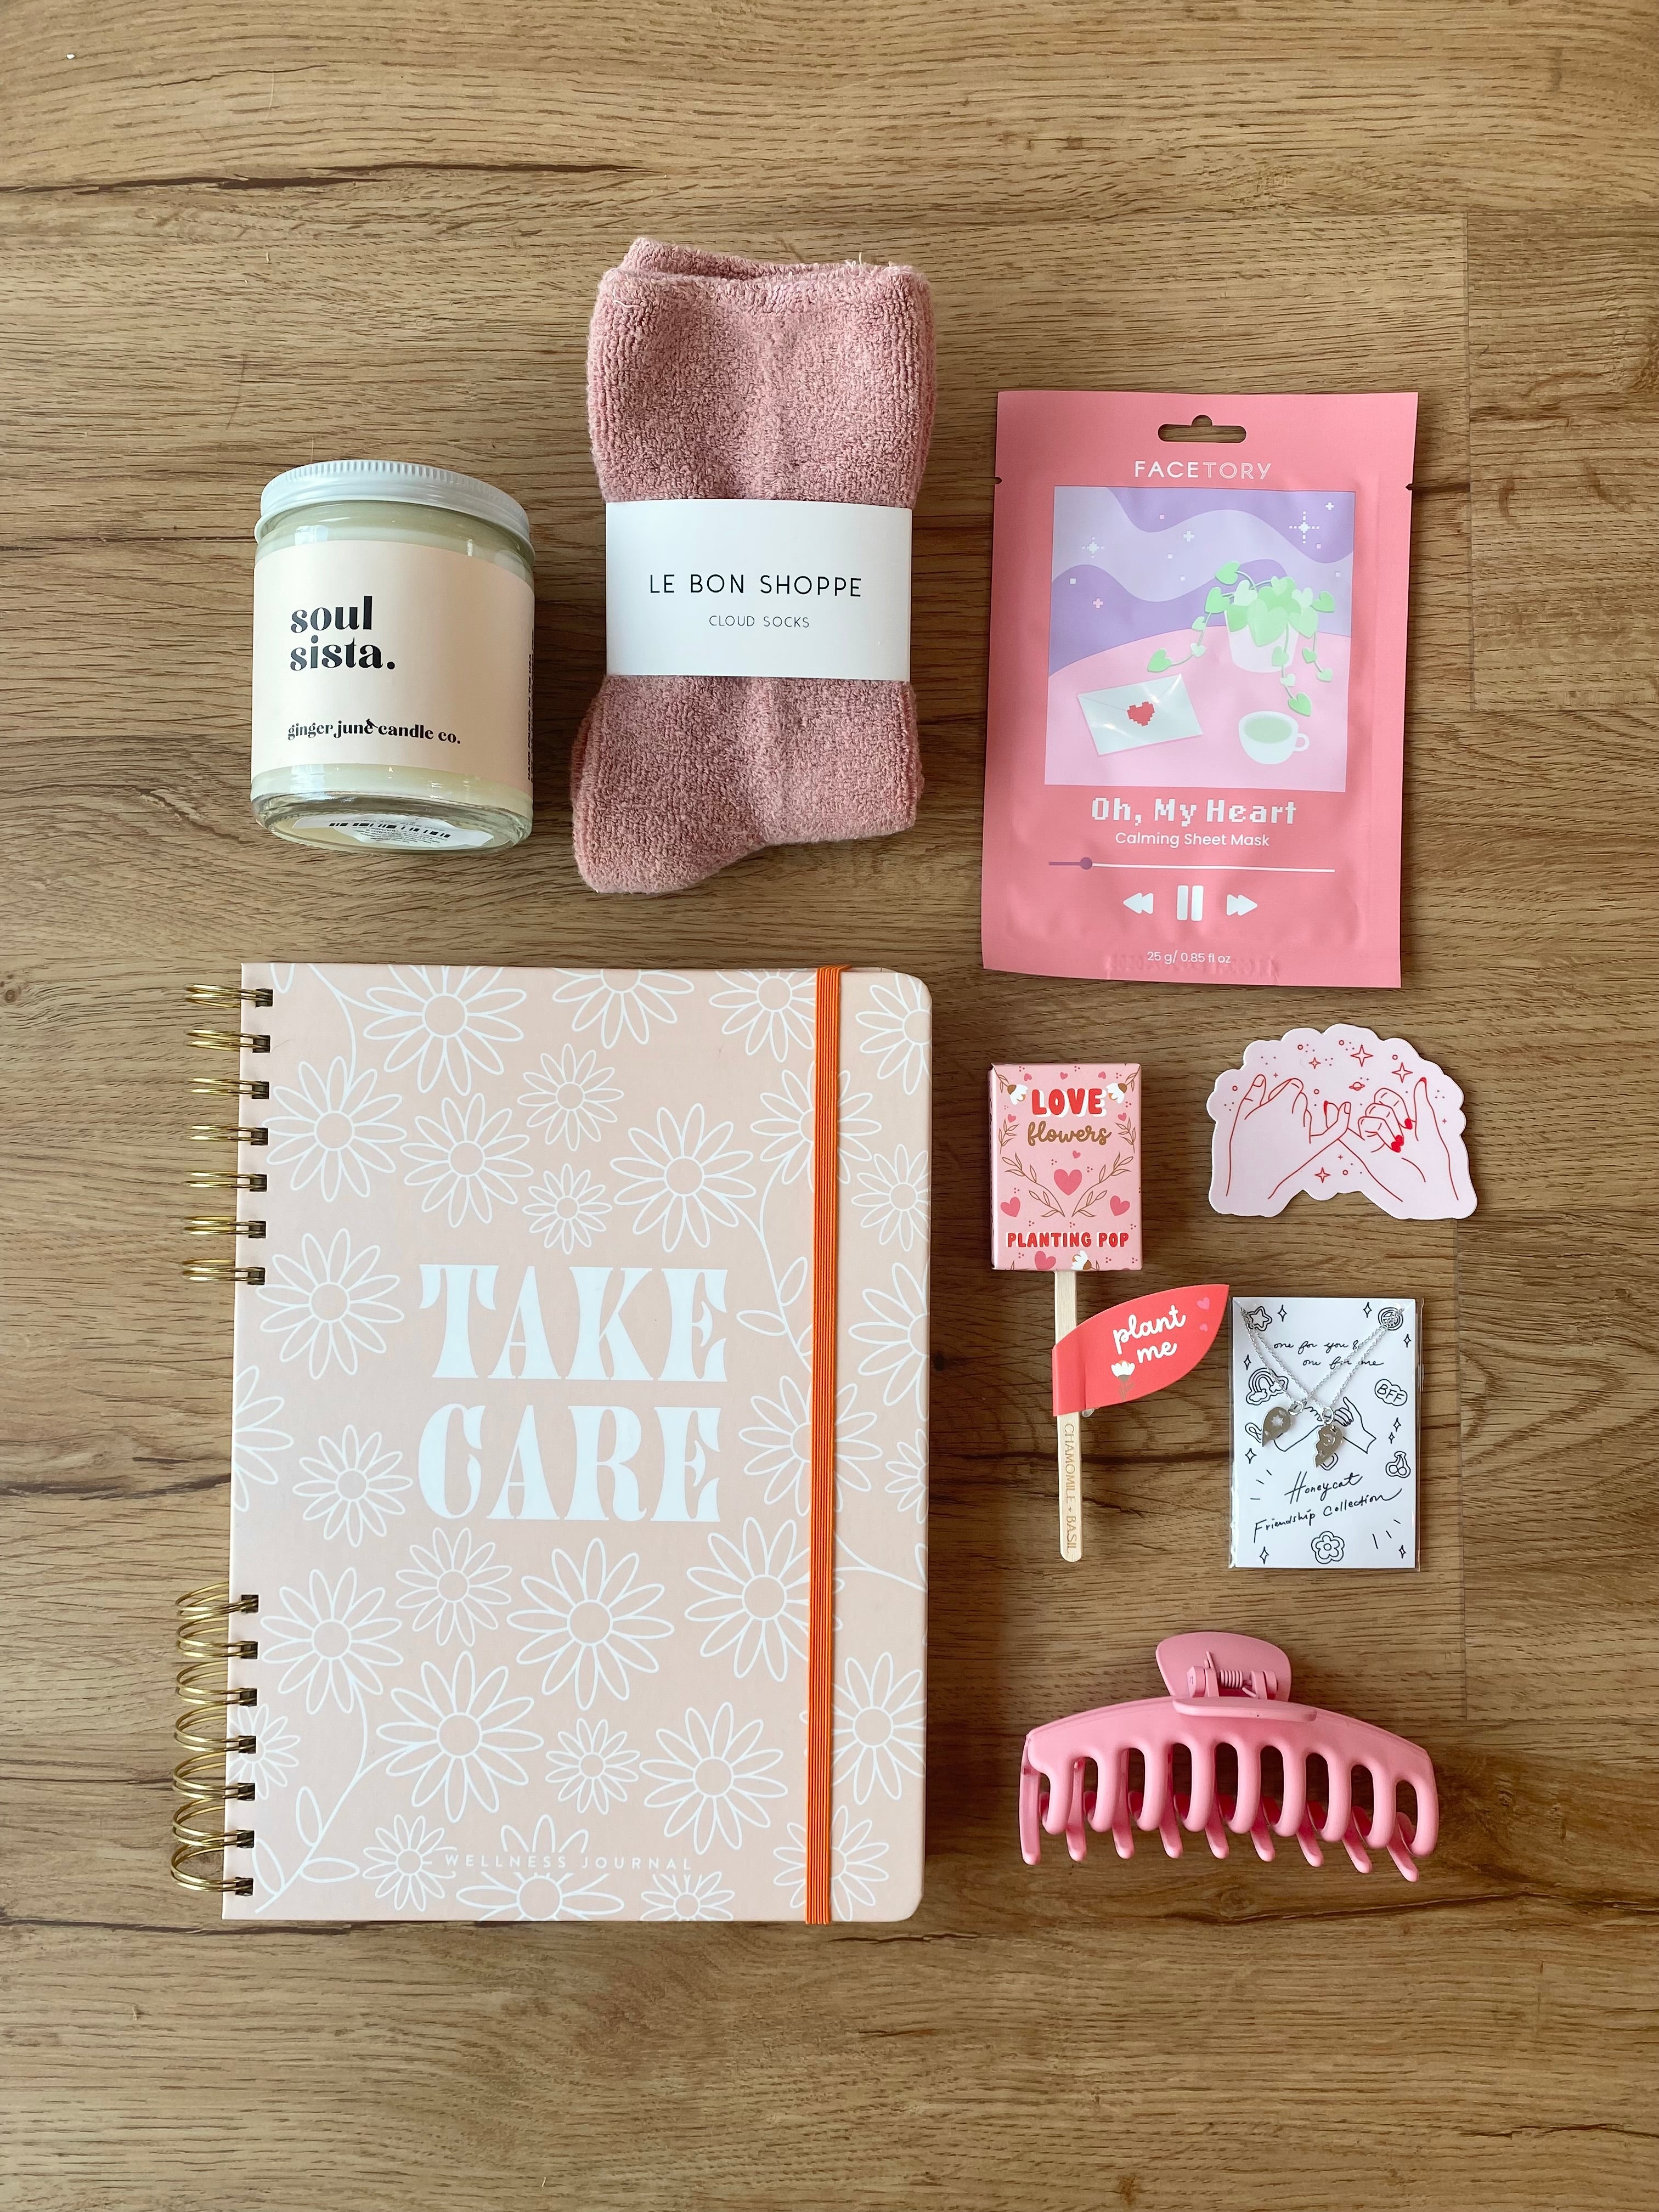 Best Friend: Build Your Own Gift Box